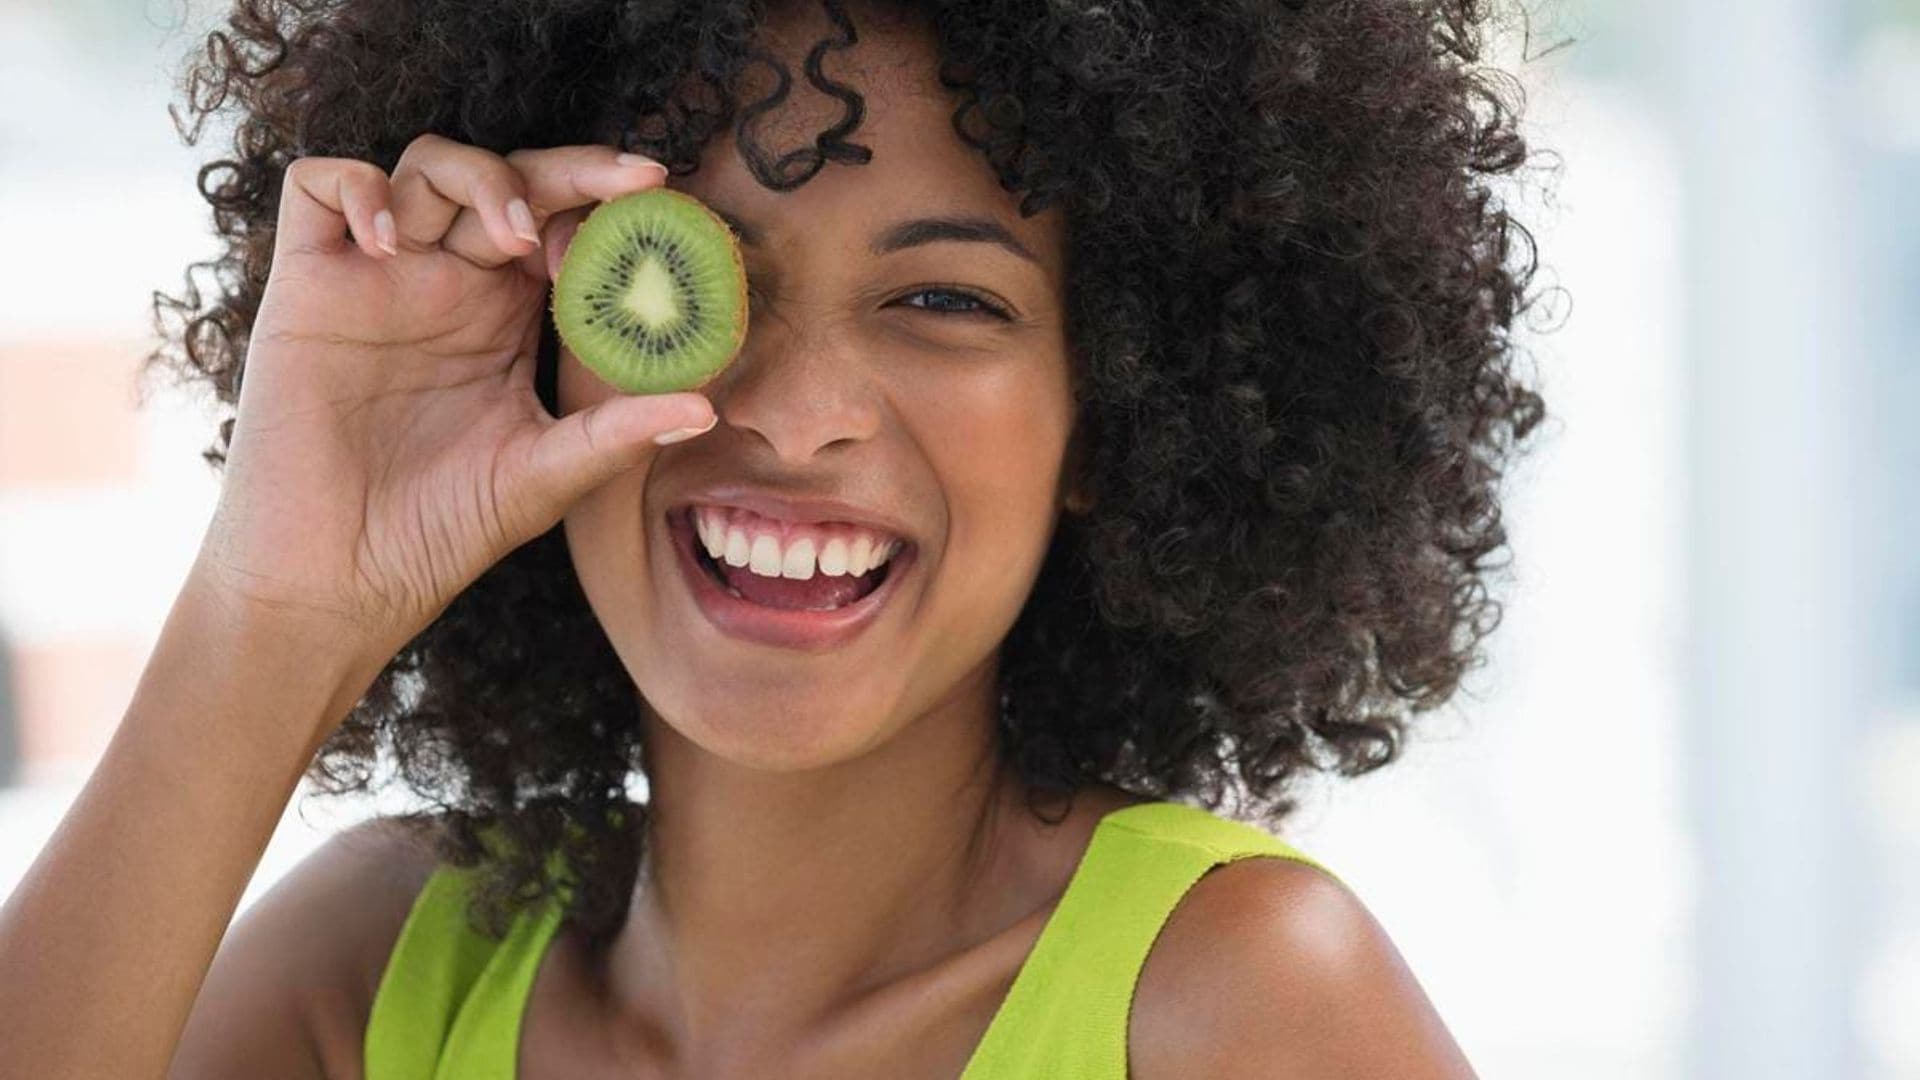 Kiwi can potentially improve your mood in less than a week